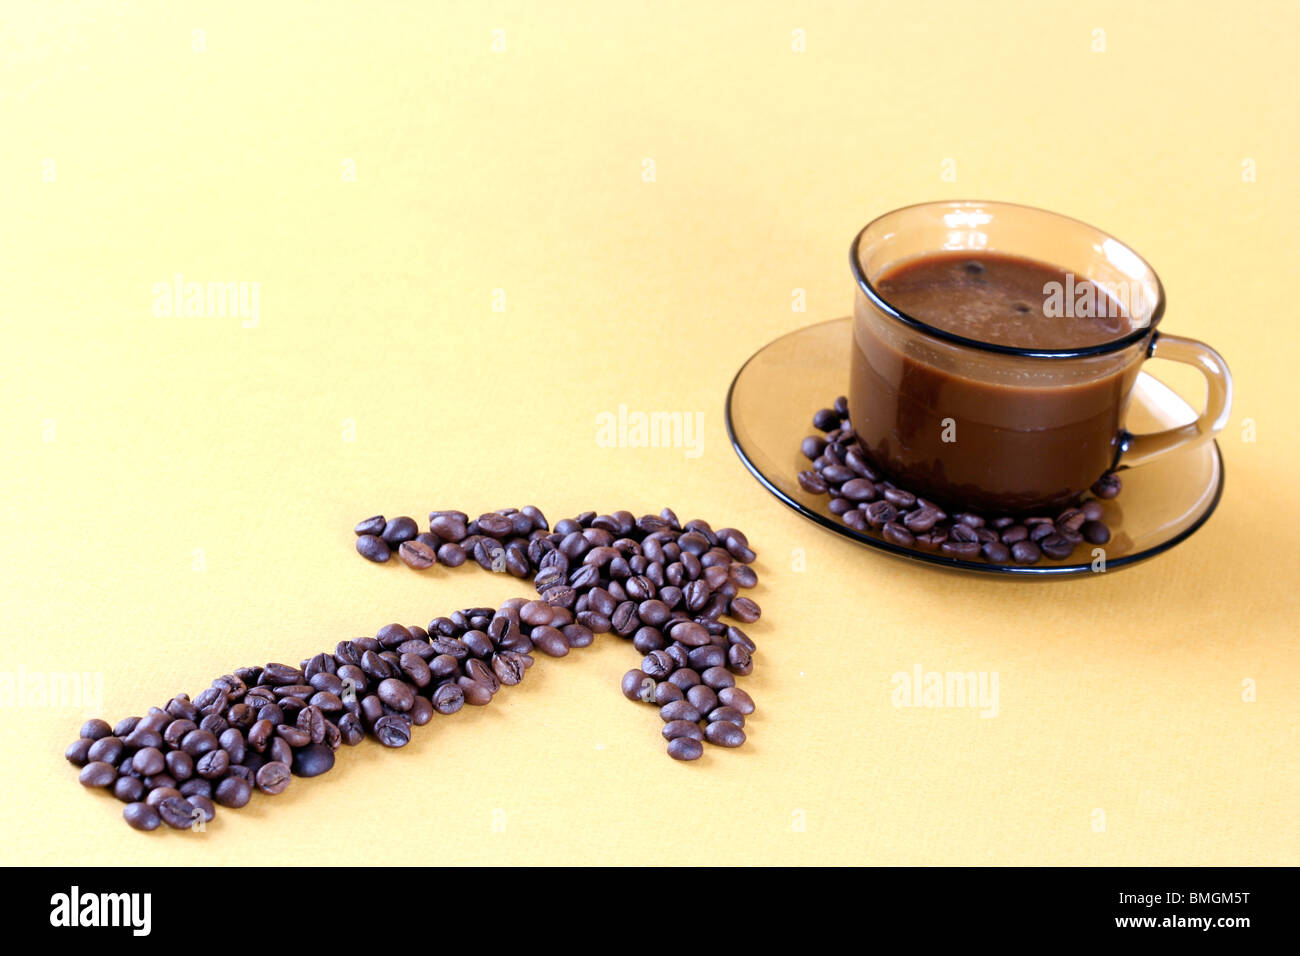 Cup with coffee, costing on coffee grain. Stock Photo